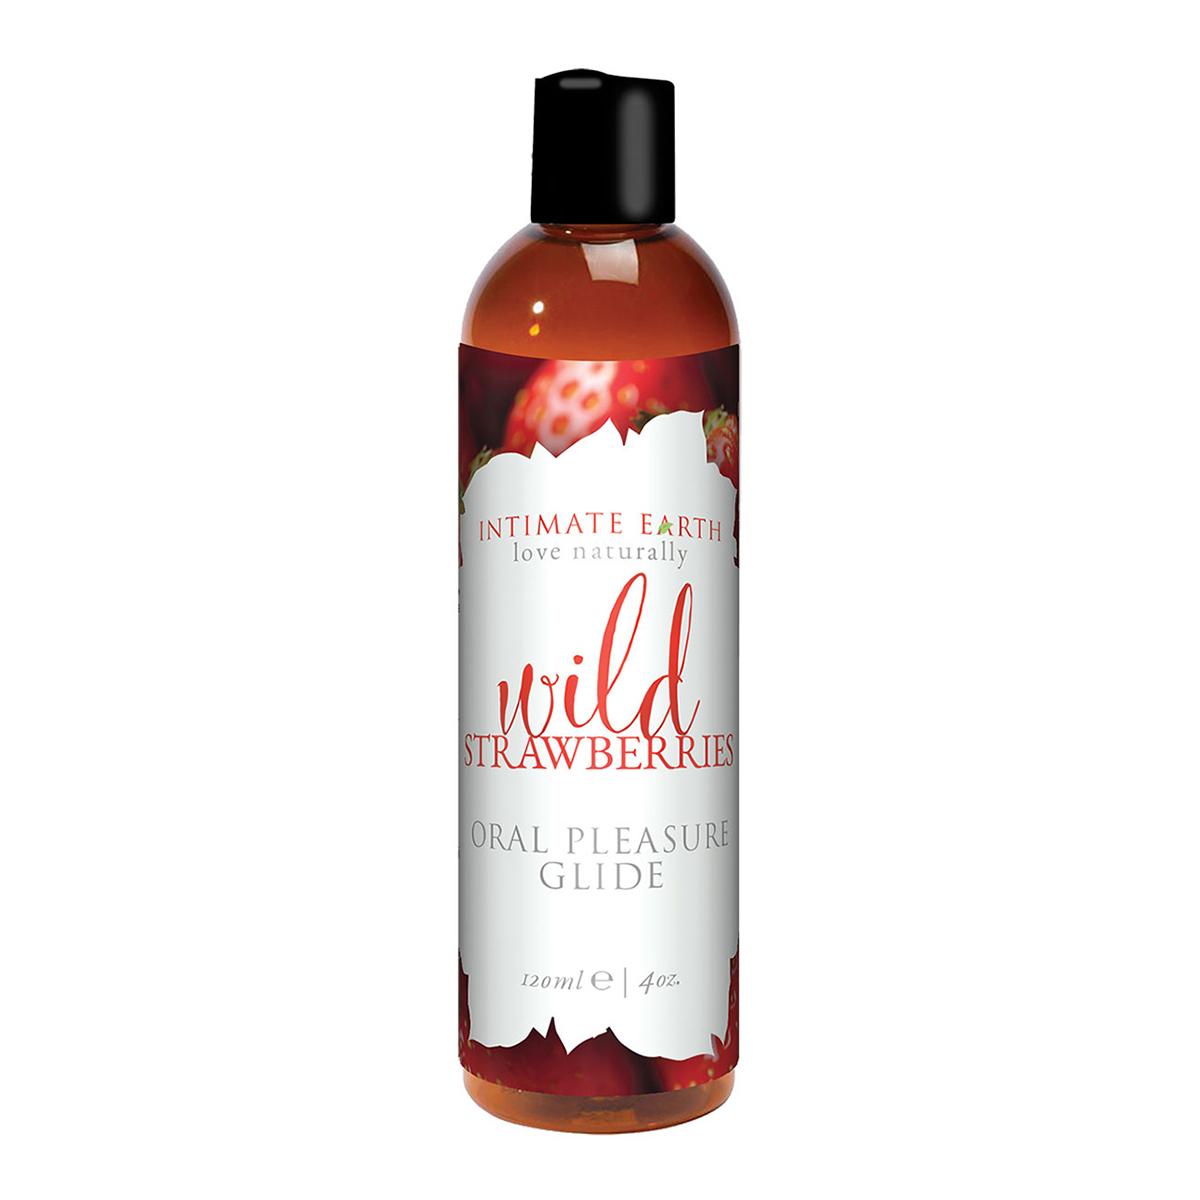 Intimate Earth Flavored Strawberry 4oz.